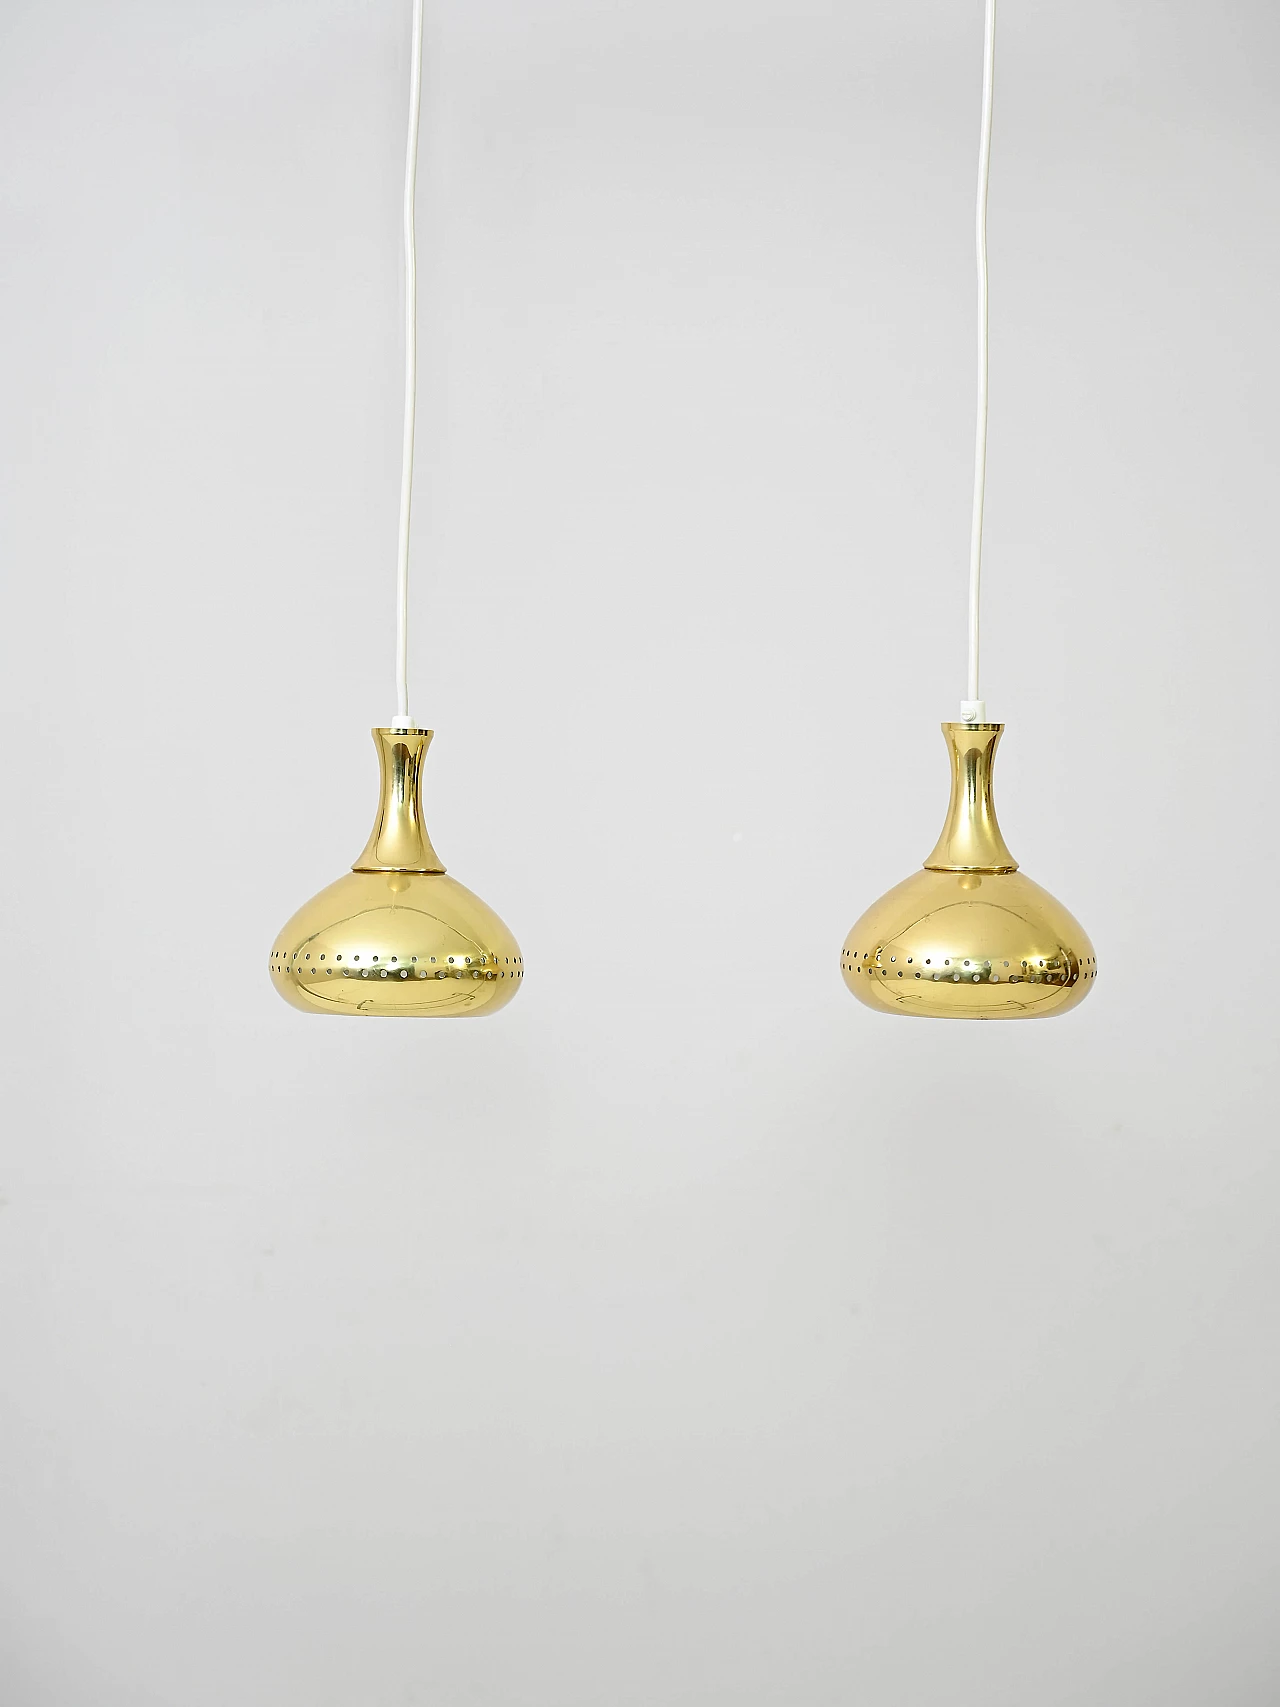 Pair of brass pendant lamps by Hans-Agne Jakobsson for Markaryd, 1950s 1